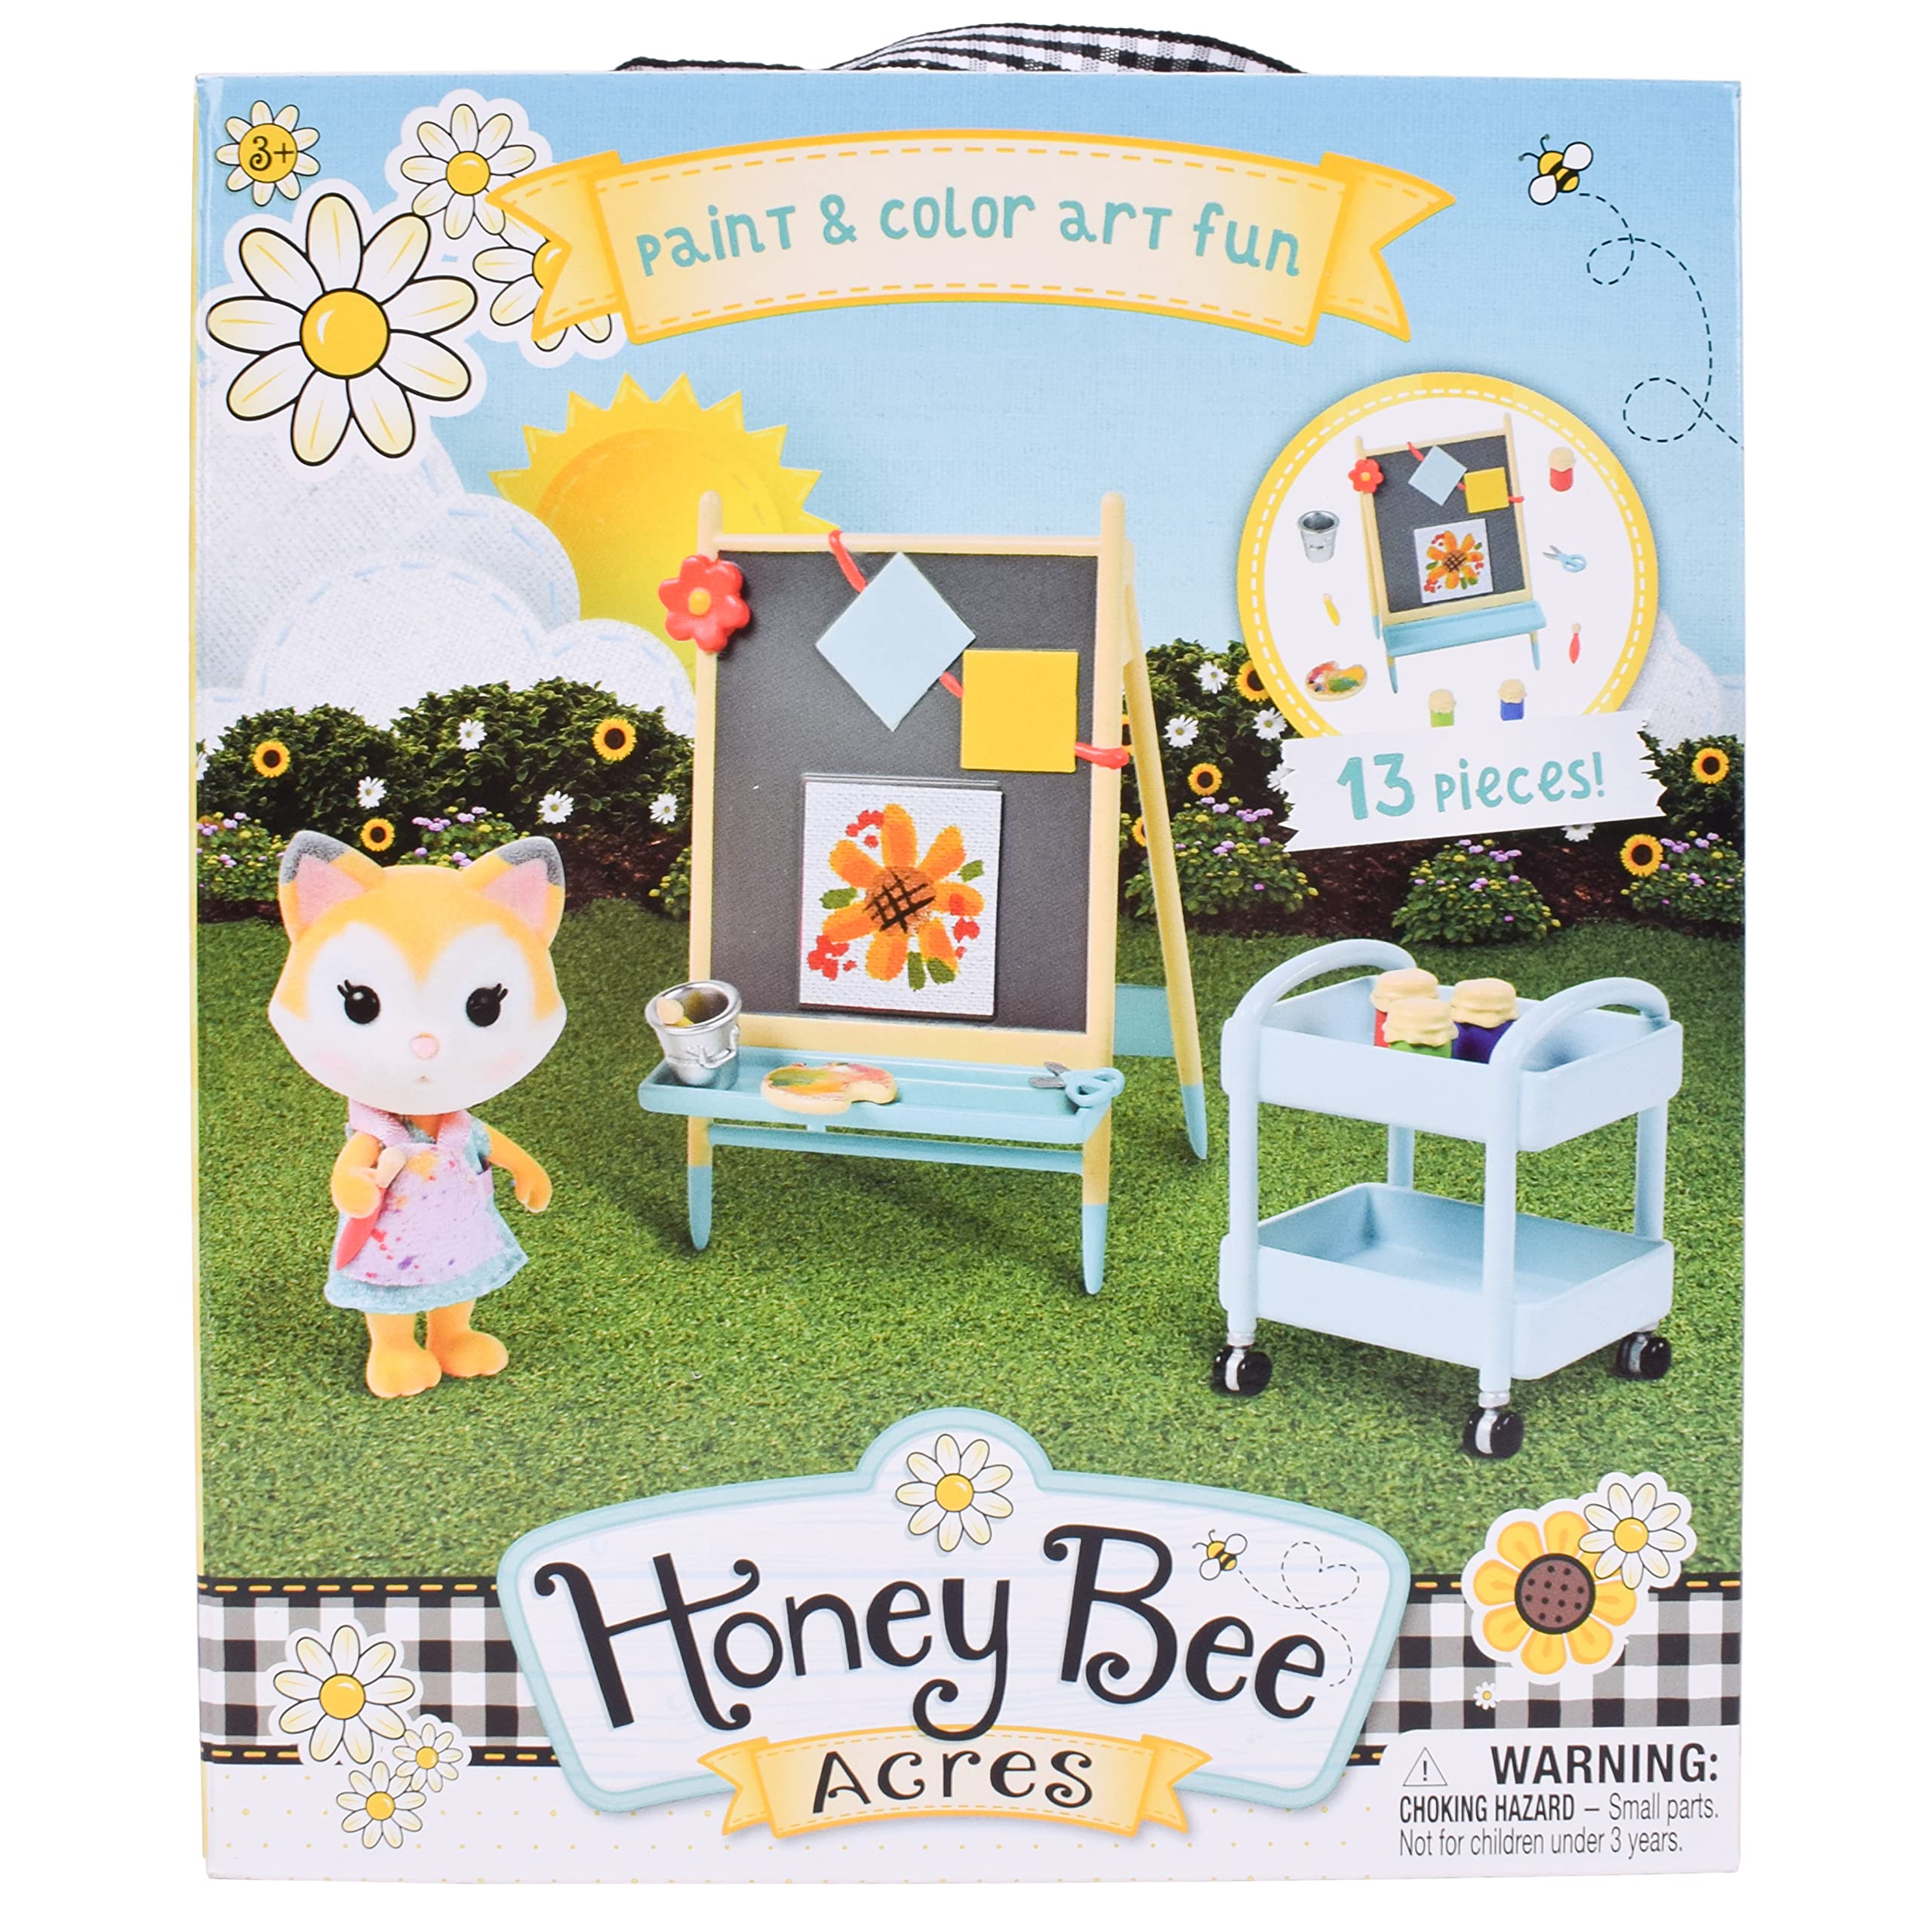 Sunny Days Entertainment Honey Bee Acres Paint & Color Art Fun – 13 Piece Dollhouse Playset with Exclusive Fox Figure | Pretend Play Toys for Kids